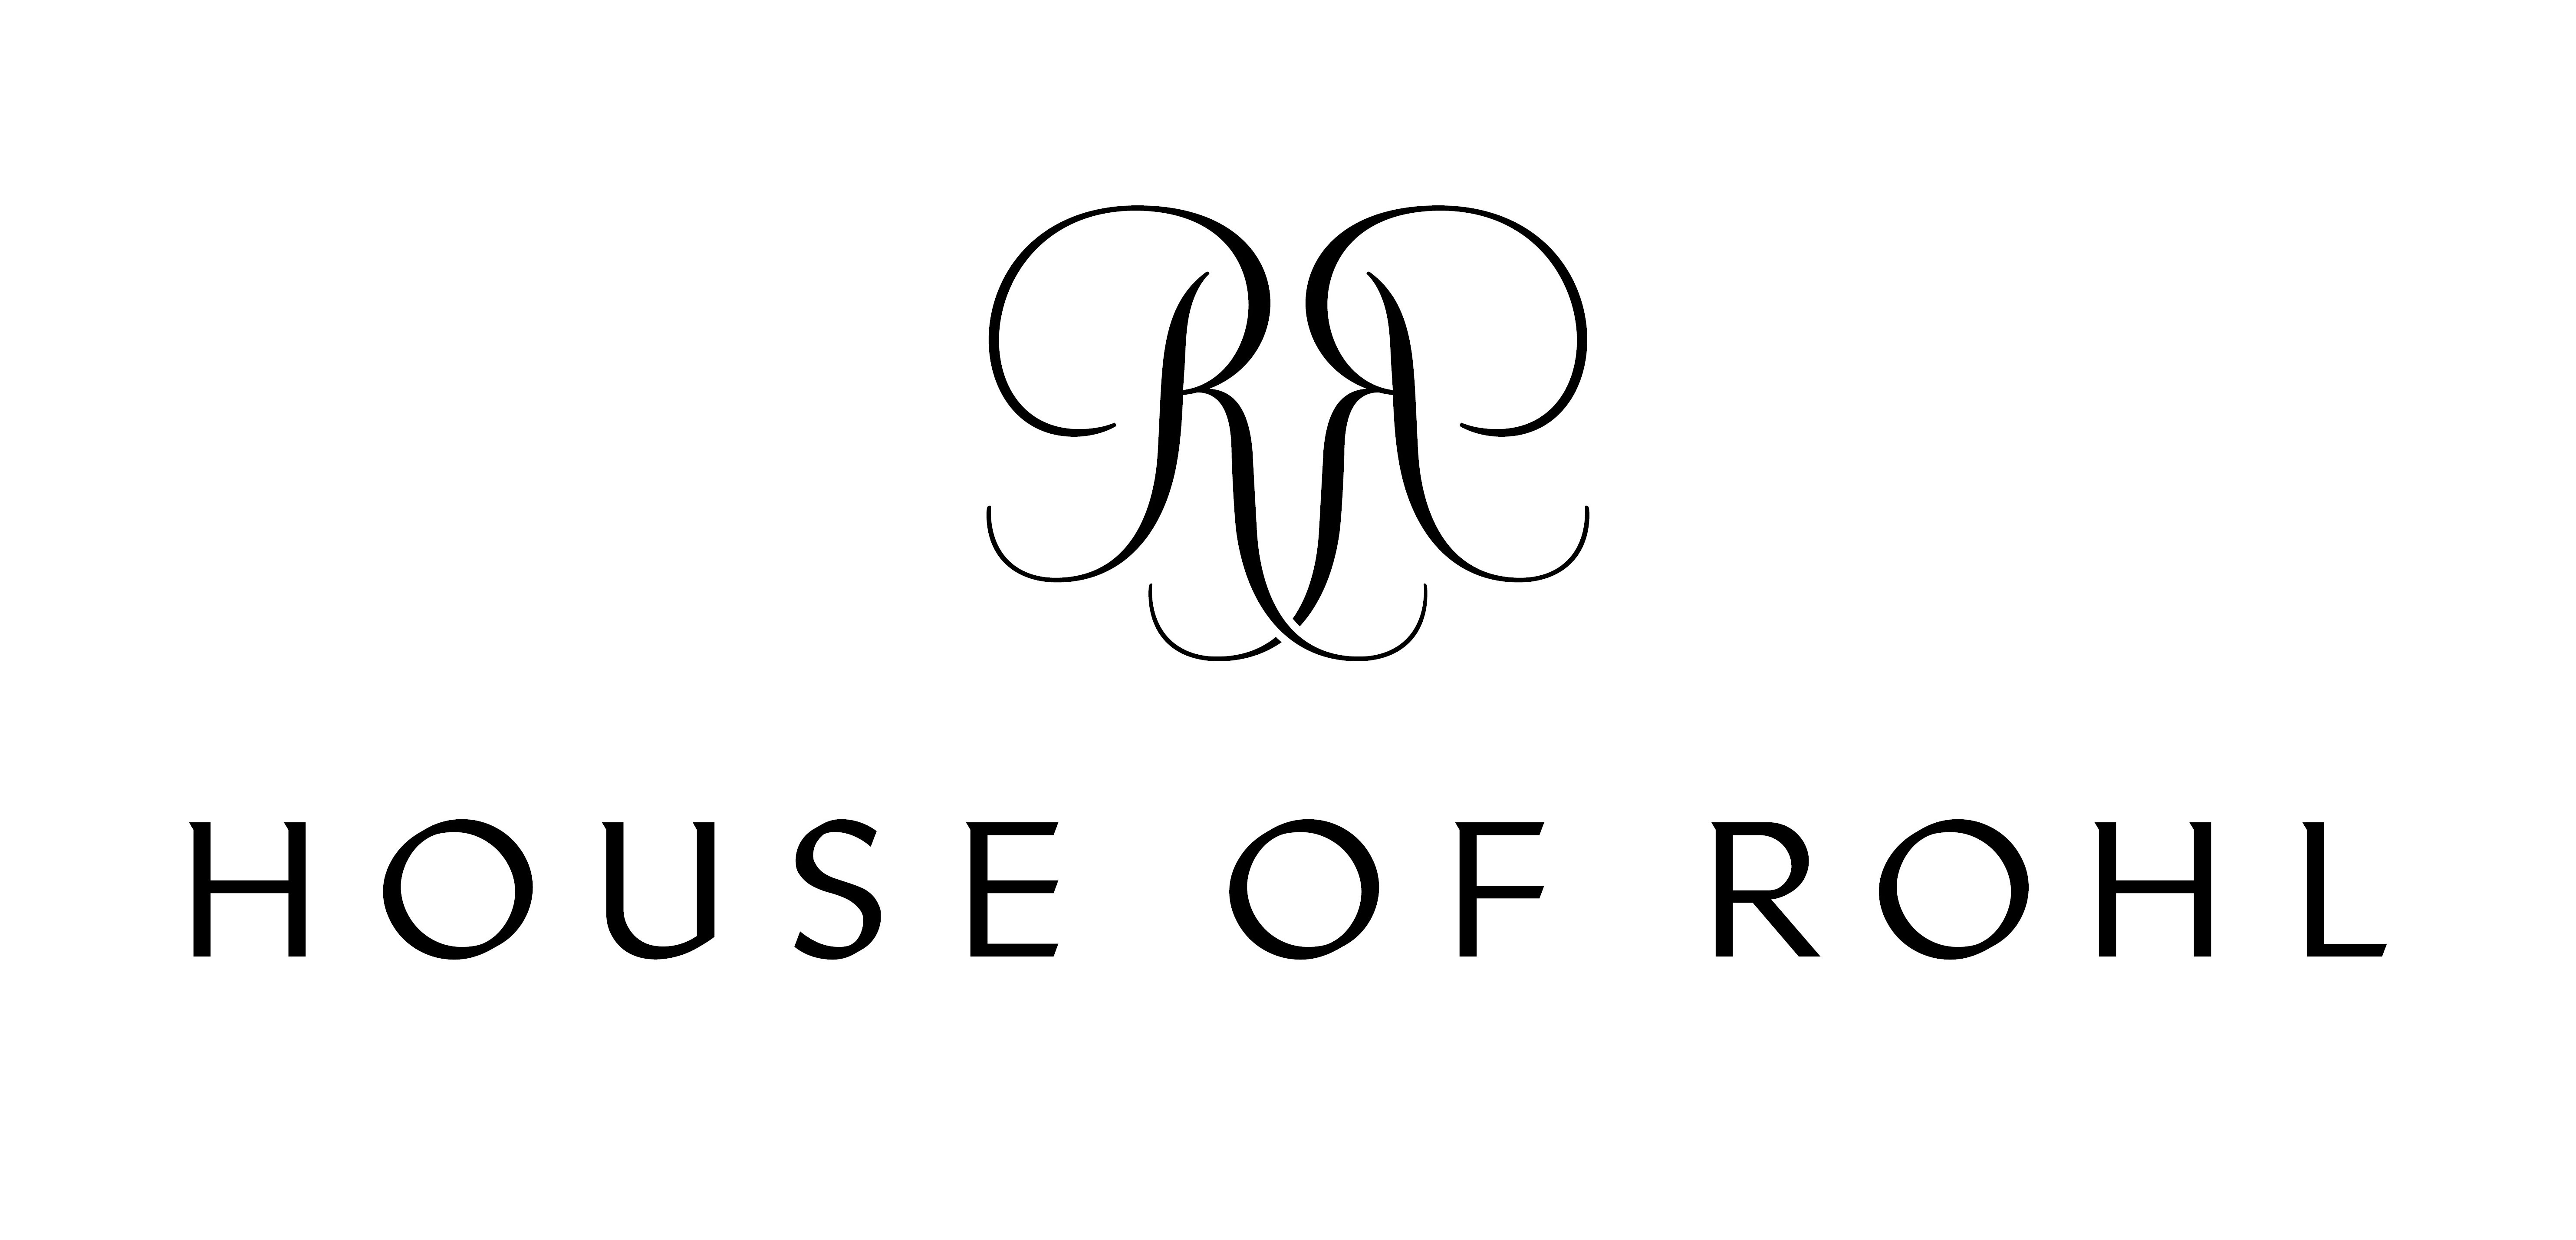 The House Of Rohl